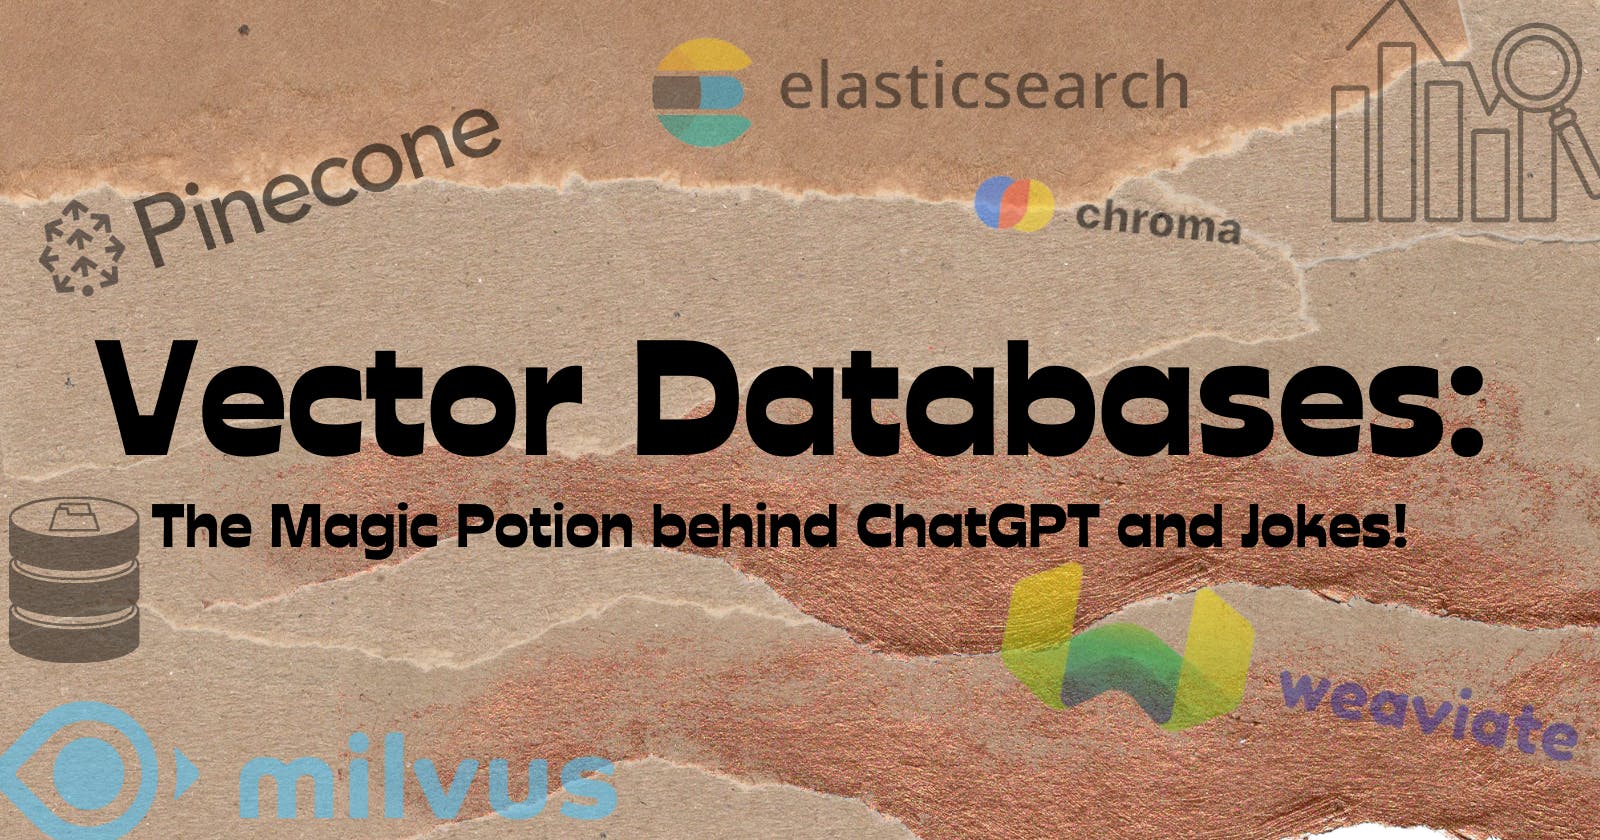 Vector Databases: The Magic Potion behind ChatGPT and Jokes!